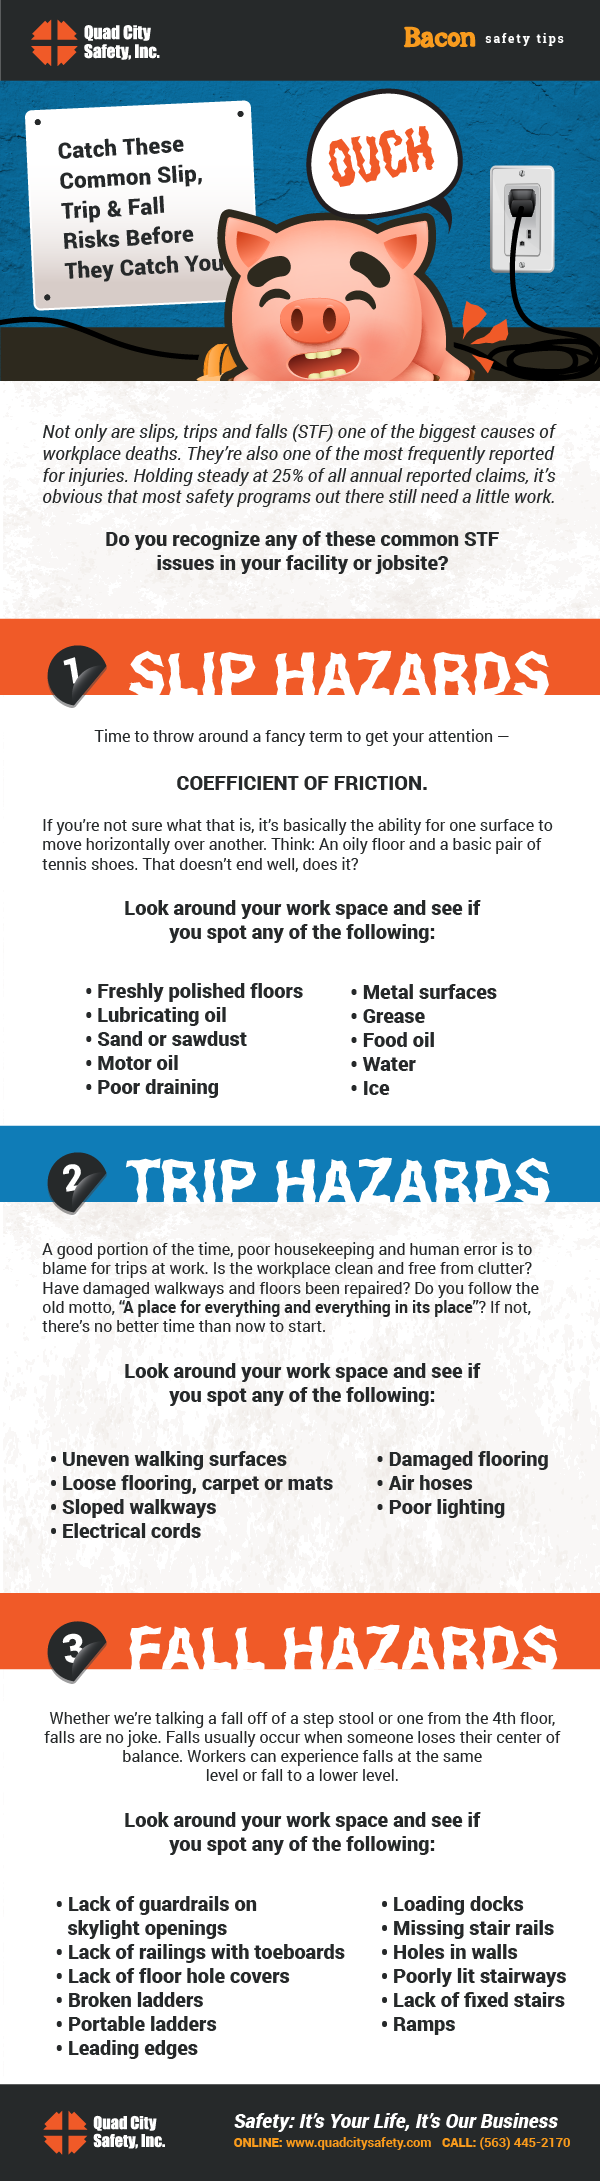 Catch These Common Slip, Trip & Fall Risks Before They Catch You  Not only are slips, trips and falls (STF) one of the biggest causes of workplace deaths. They’re also one of the most frequently reported for injuries. Holding steady at 25% of all annual reported claims, it’s obvious that most safety programs out there still need a little work.   Do you recognize any of these common STF issues in your facility or jobsite?   Slip Hazards  Time to throw around a fancy term to get your attention — Coefficient of Friction.   If you’re not sure what that is, it’s basically the ability for one surface to move horizontally over another. Think: An oily floor and a basic pair of tennis shoes. That doesn’t end well, does it?  Look around your work space and see if you spot any of the following:    Freshly polished floors Lubricating oil Sand or sawdust Motor oil Poor draining Metal surfaces Grease Food oil Water Ice    Trip Hazards  A good portion of the time, poor housekeeping and human error is to blame for trips at work. Is the workplace clean and free from clutter? Have damaged walkways and floors been repaired? Do you follow the old motto, “A place for everything and everything in its place”? If not, there’s no better time than now to start.   Look around your work space and see if you spot any of the following:    Uneven walking surfaces Loose flooring, carpet or mats Sloped walkways Electrical cords Damaged flooring Air hoses  Poor lighting    Fall Hazards  Whether we’re talking a fall off of a step stool or one from the 4th floor, falls are no joke. Falls usually occur when someone loses their center of balance. Workers can experience falls at the same level or fall to a lower level.   Look around your work space and see if you spot any of the following:   Lack of guardrails on skylight openings Lack of railings with toeboards Lack of floor hole covers Broken ladders Portable ladders Leading edges Loading docks Missing stair rails  Holes in walls  Poorly lit stairways Lack of fixed stairs Ramps